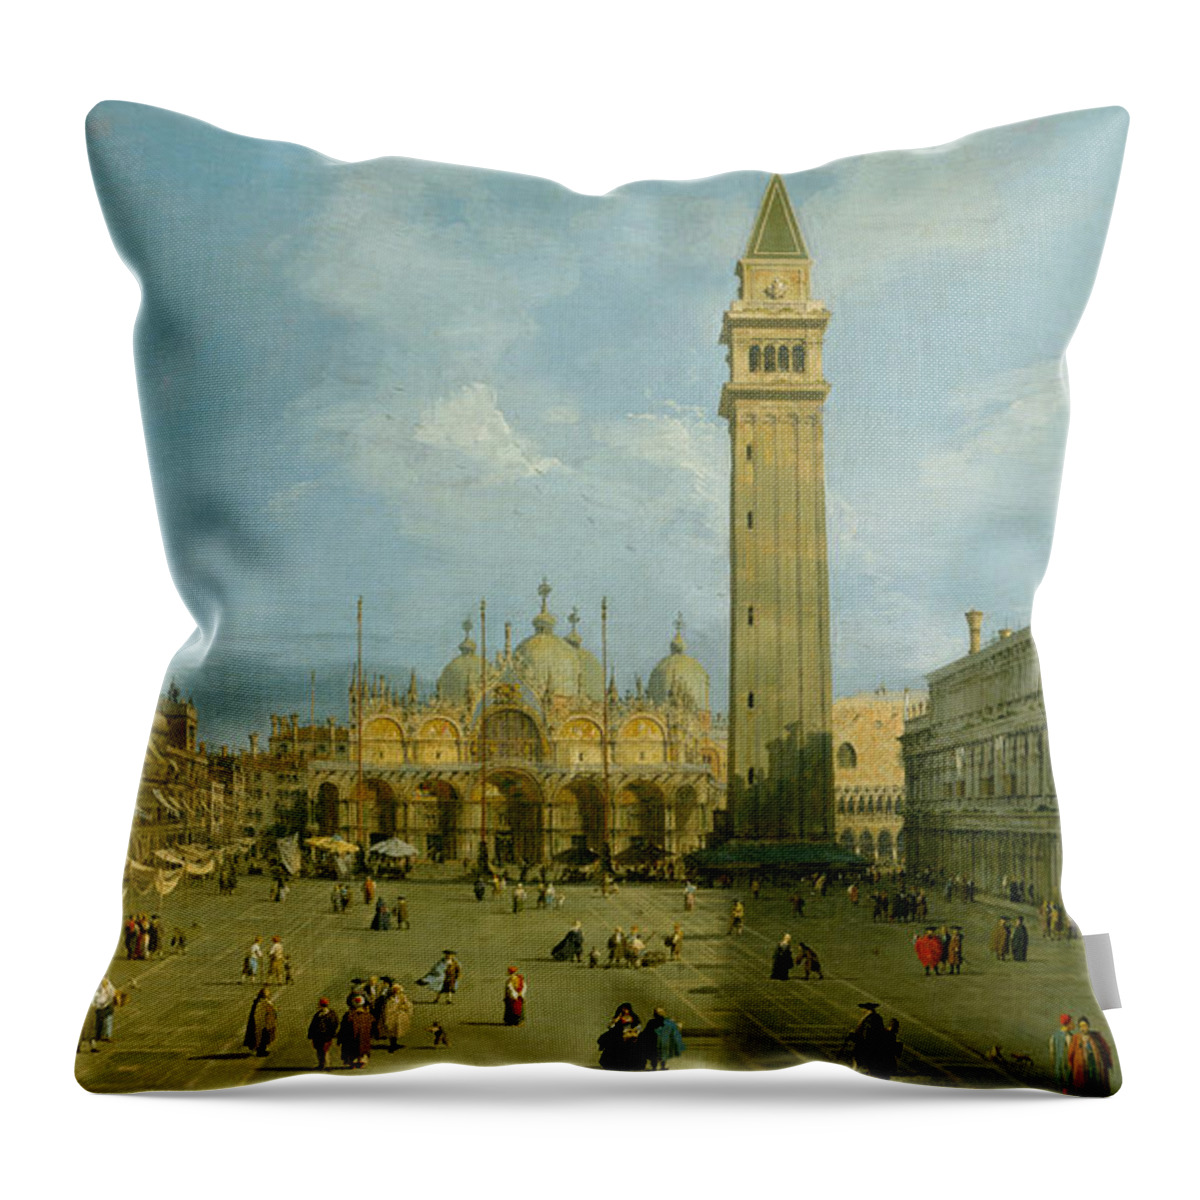 Canaletto Throw Pillow featuring the painting Piazza San Marco by Canaletto